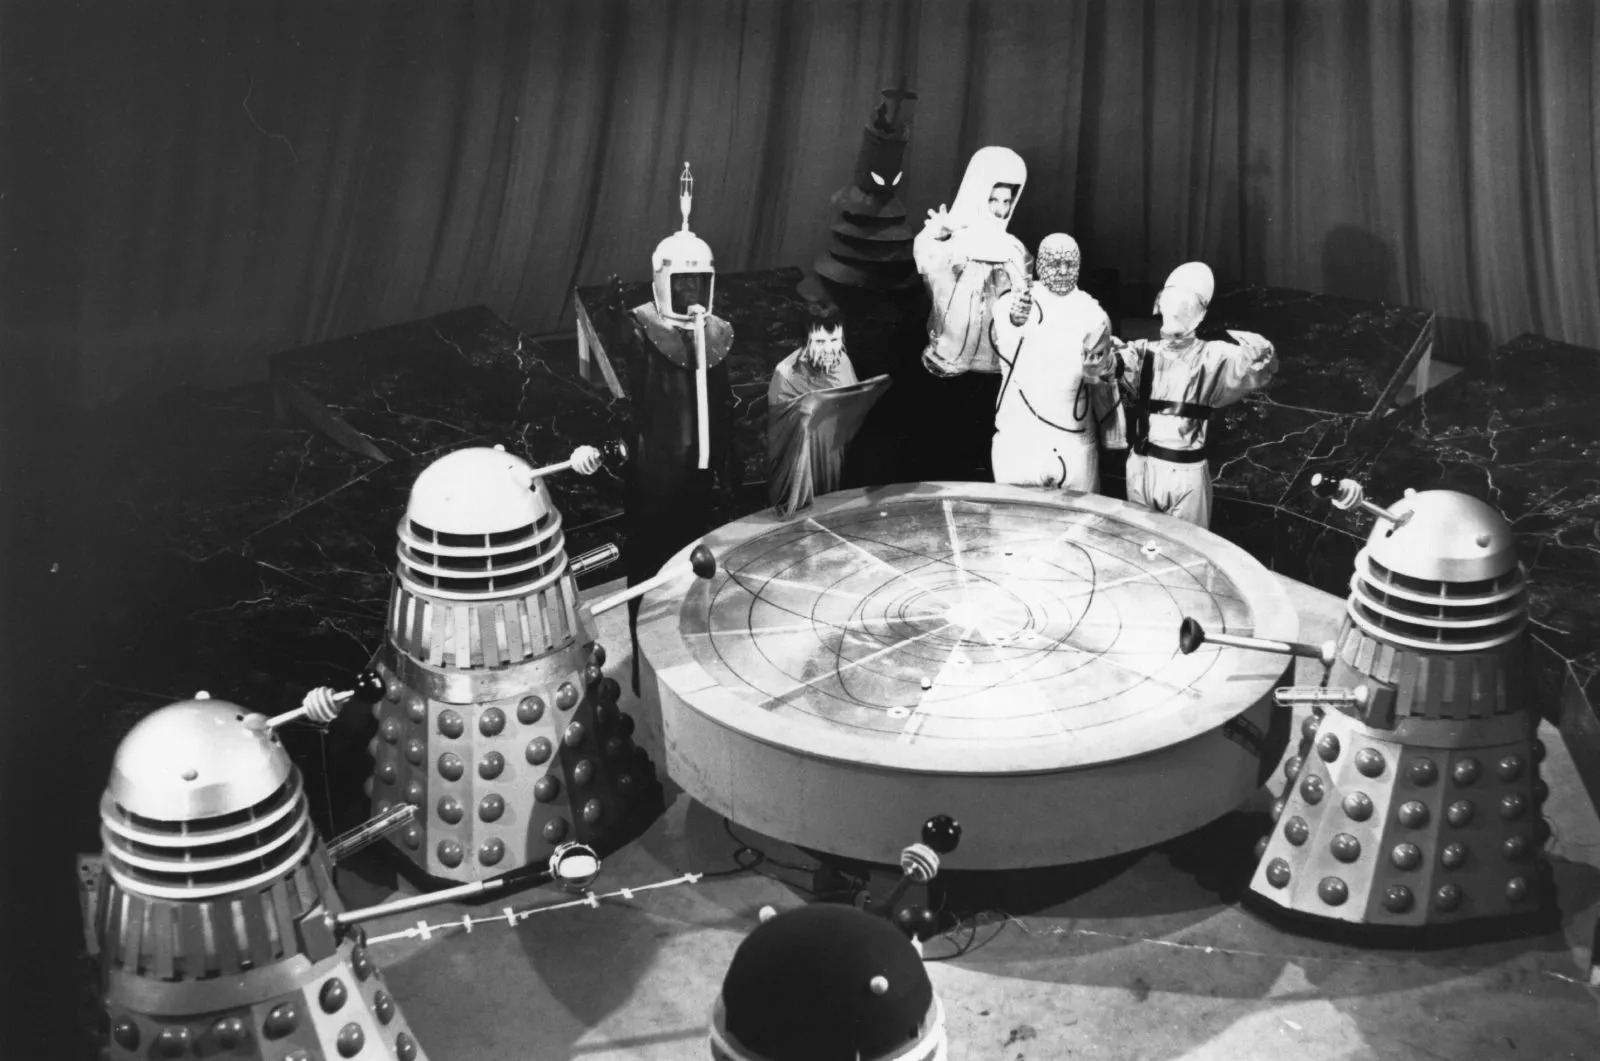 Screencap from Mission to the Unknown (episode one of Nightmare on Planet Kembel): a wide open conference room shows 6 characters and 3 Daleks (as well as one black Dalek) around a round table with some sort of star map on it, viewed from above. The alien characters are (from left to right): a person wearing some sort of diving helmet with an antenna on top; a short person with icicle-type appendages dangling from their face; an immensely tall person dressed in all black whose neck is ruffled and whose face only shows two angry white eyes; a man in a white radiation-type suit with his hand outstretched towards the camera; a bald man in a jumpsuit whose face is covered with dots, and who points a laser gun towards the camera; and someone wearing a wide helmet (or false head) that tapers up towards the back.